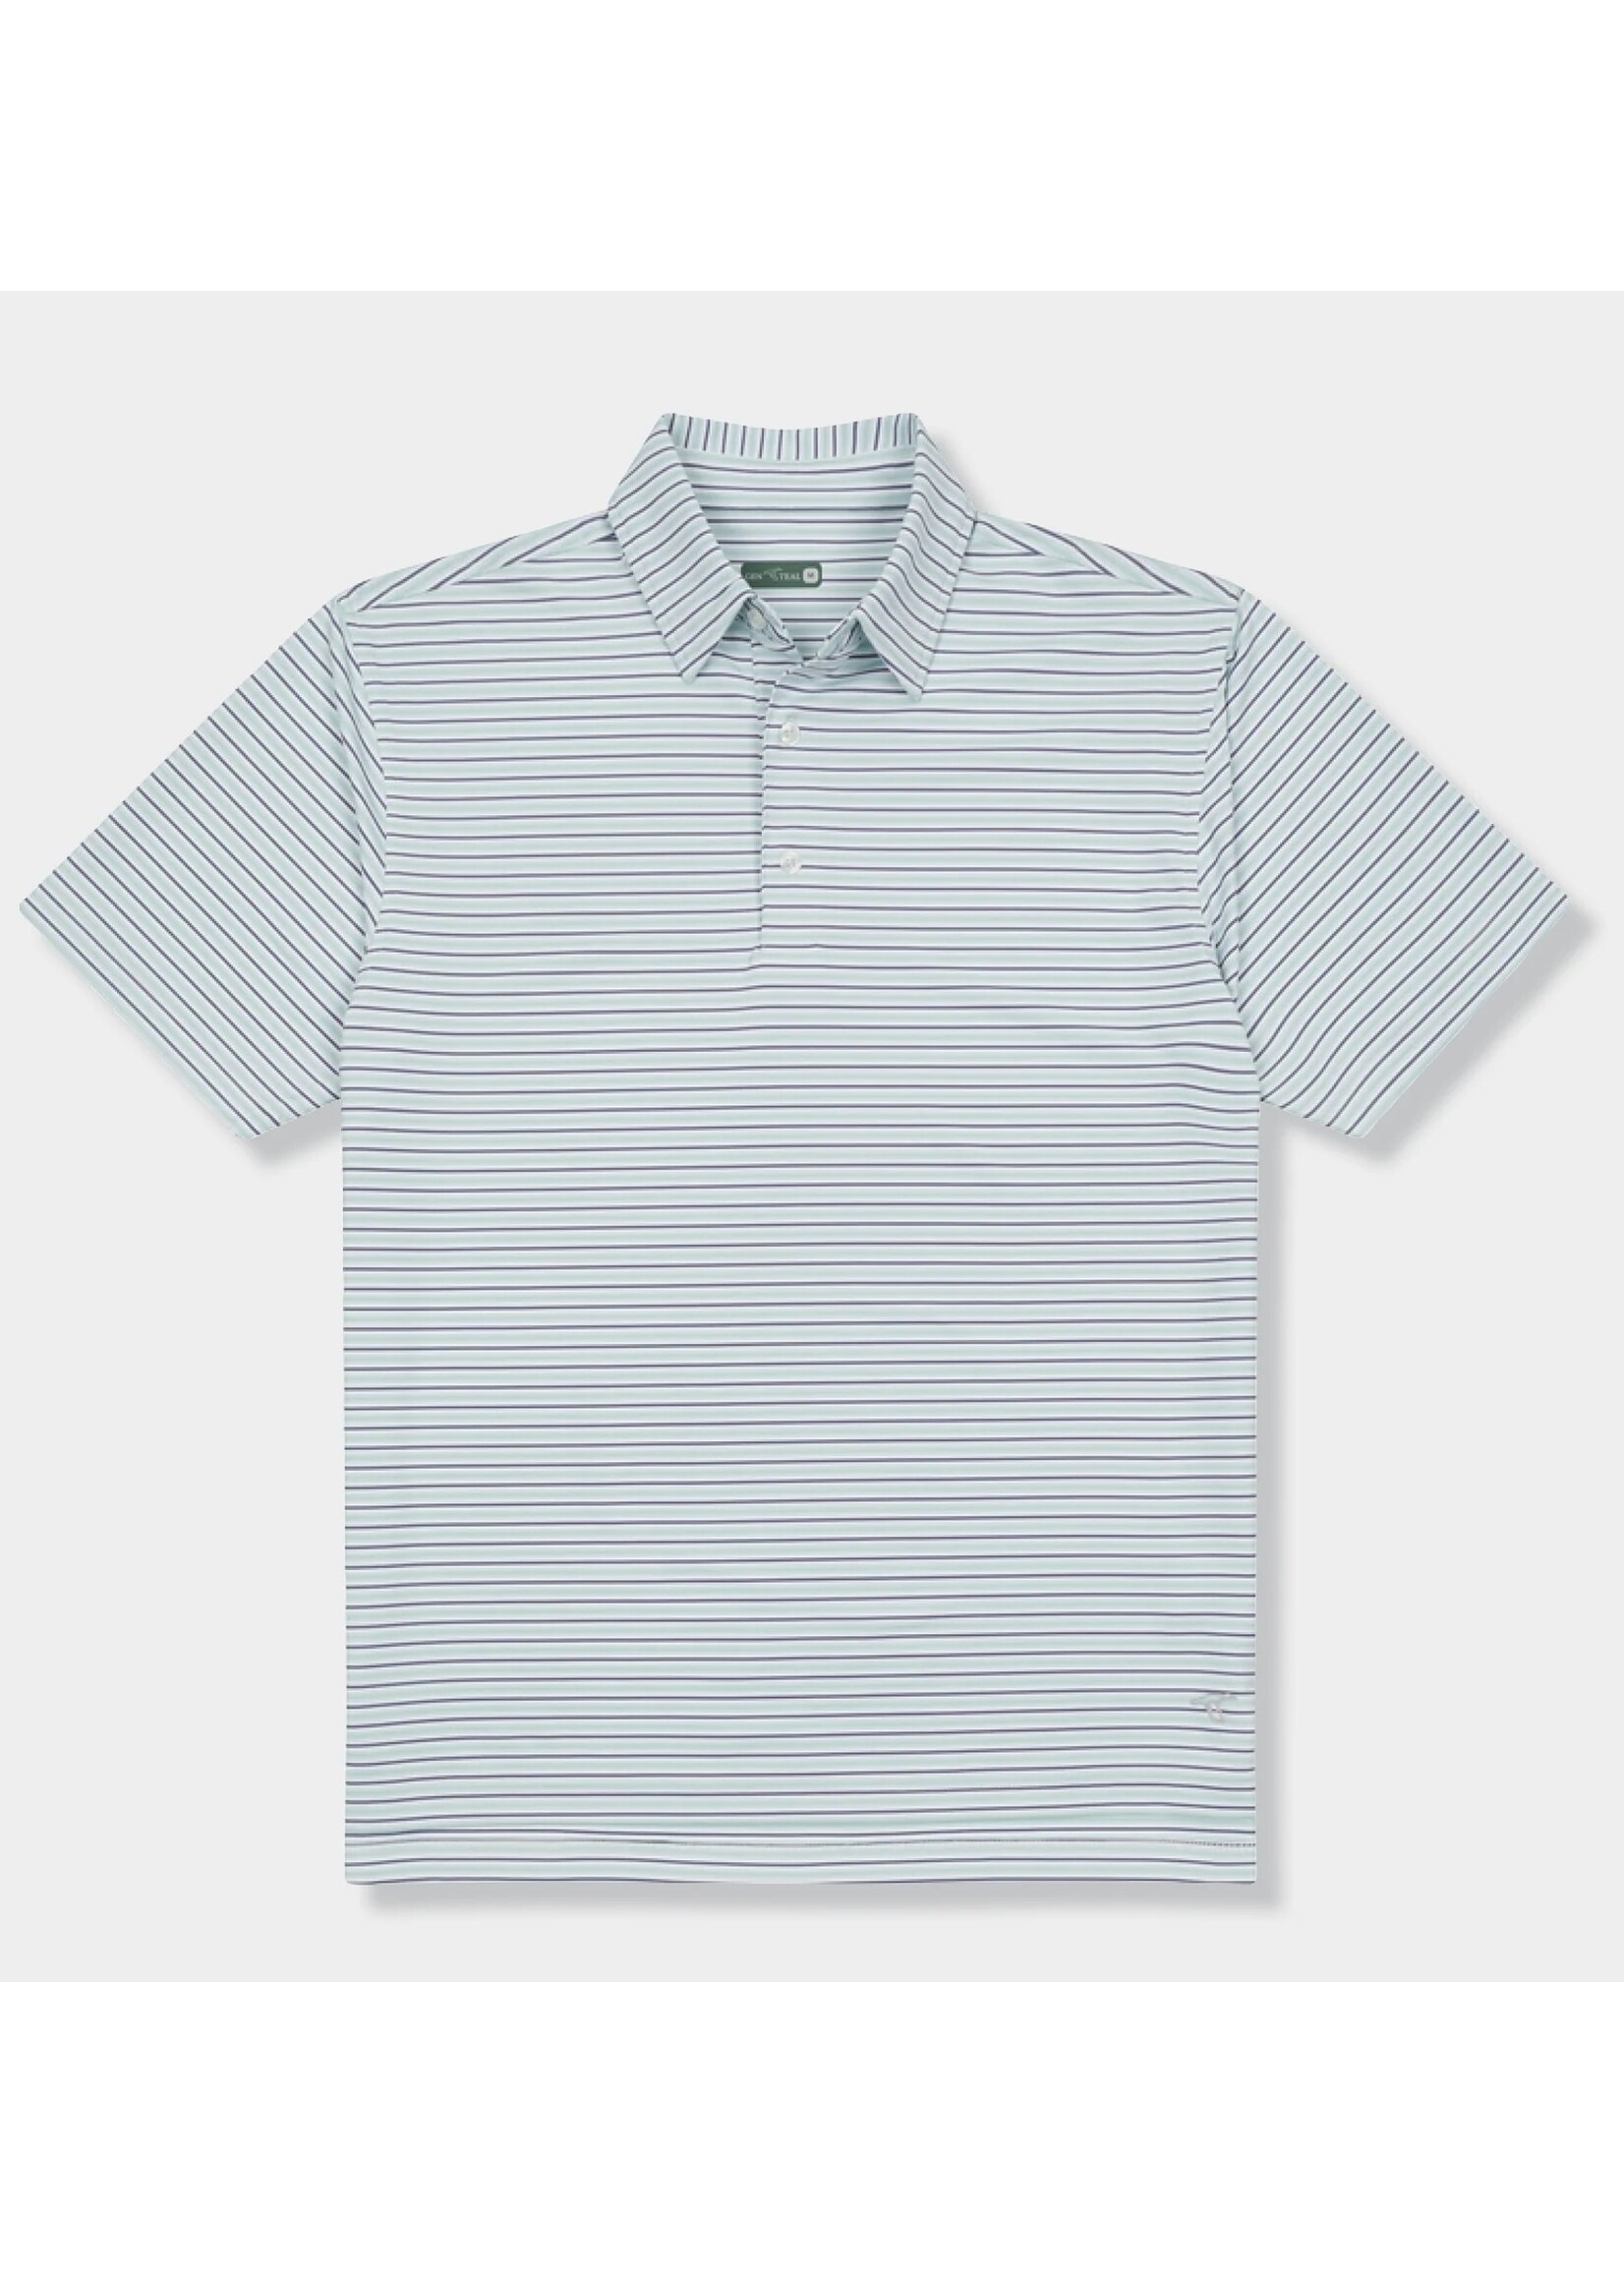 GenTeal Apparel Wrightsville Performance Polo